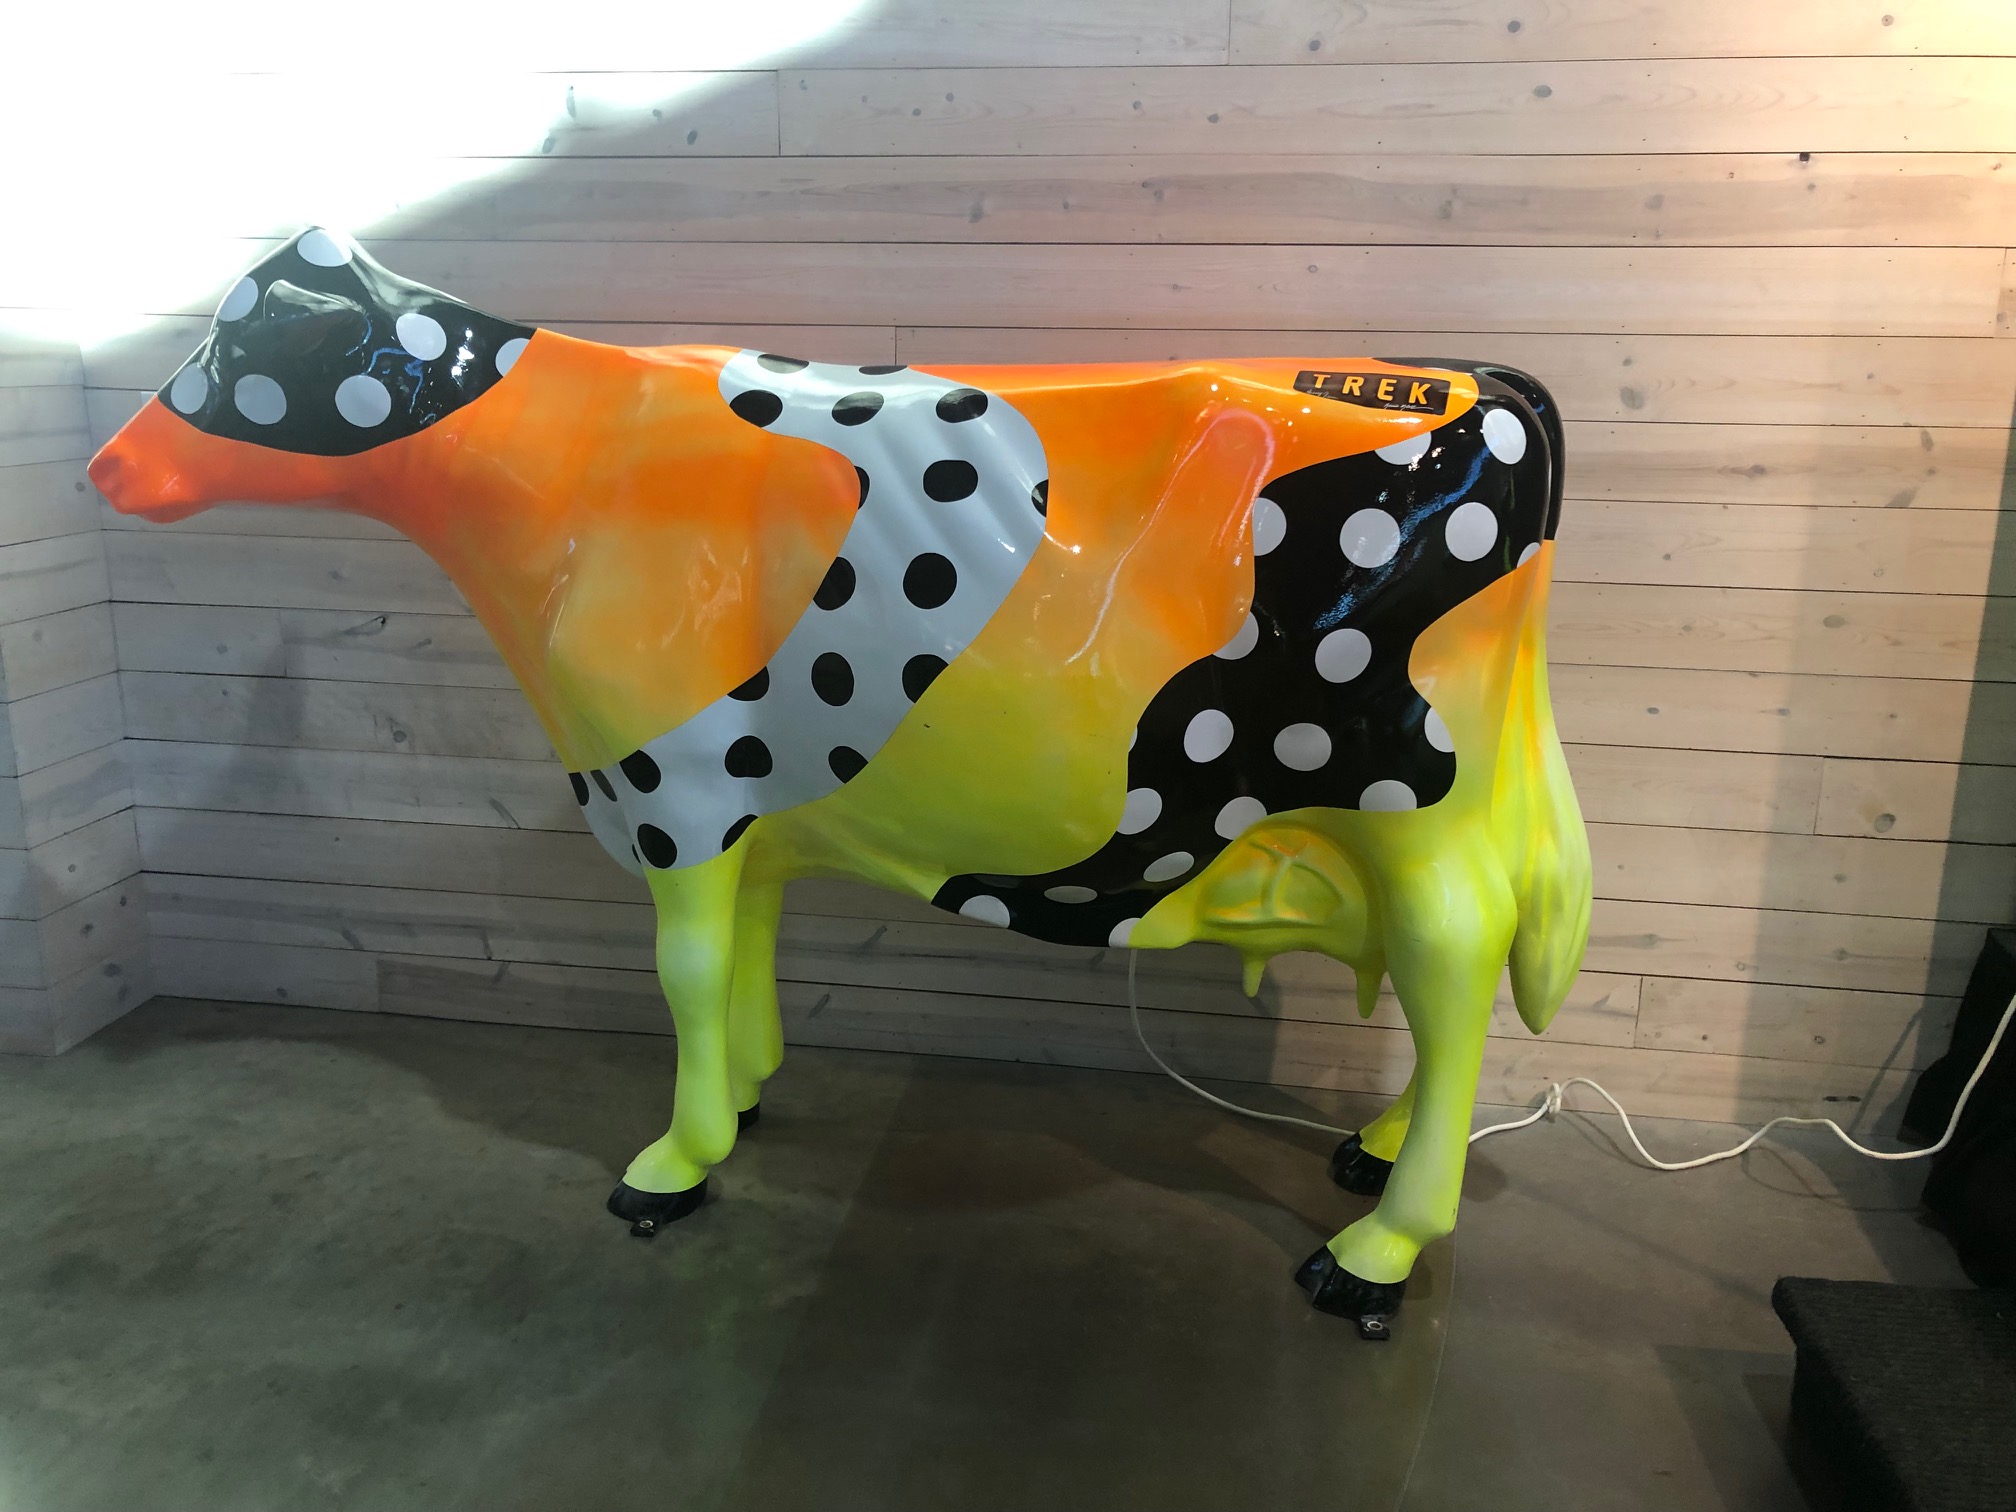 Cow figure that is very colorful. Orange to yellow fade from top to bottom with a black and white swirl with polka dots